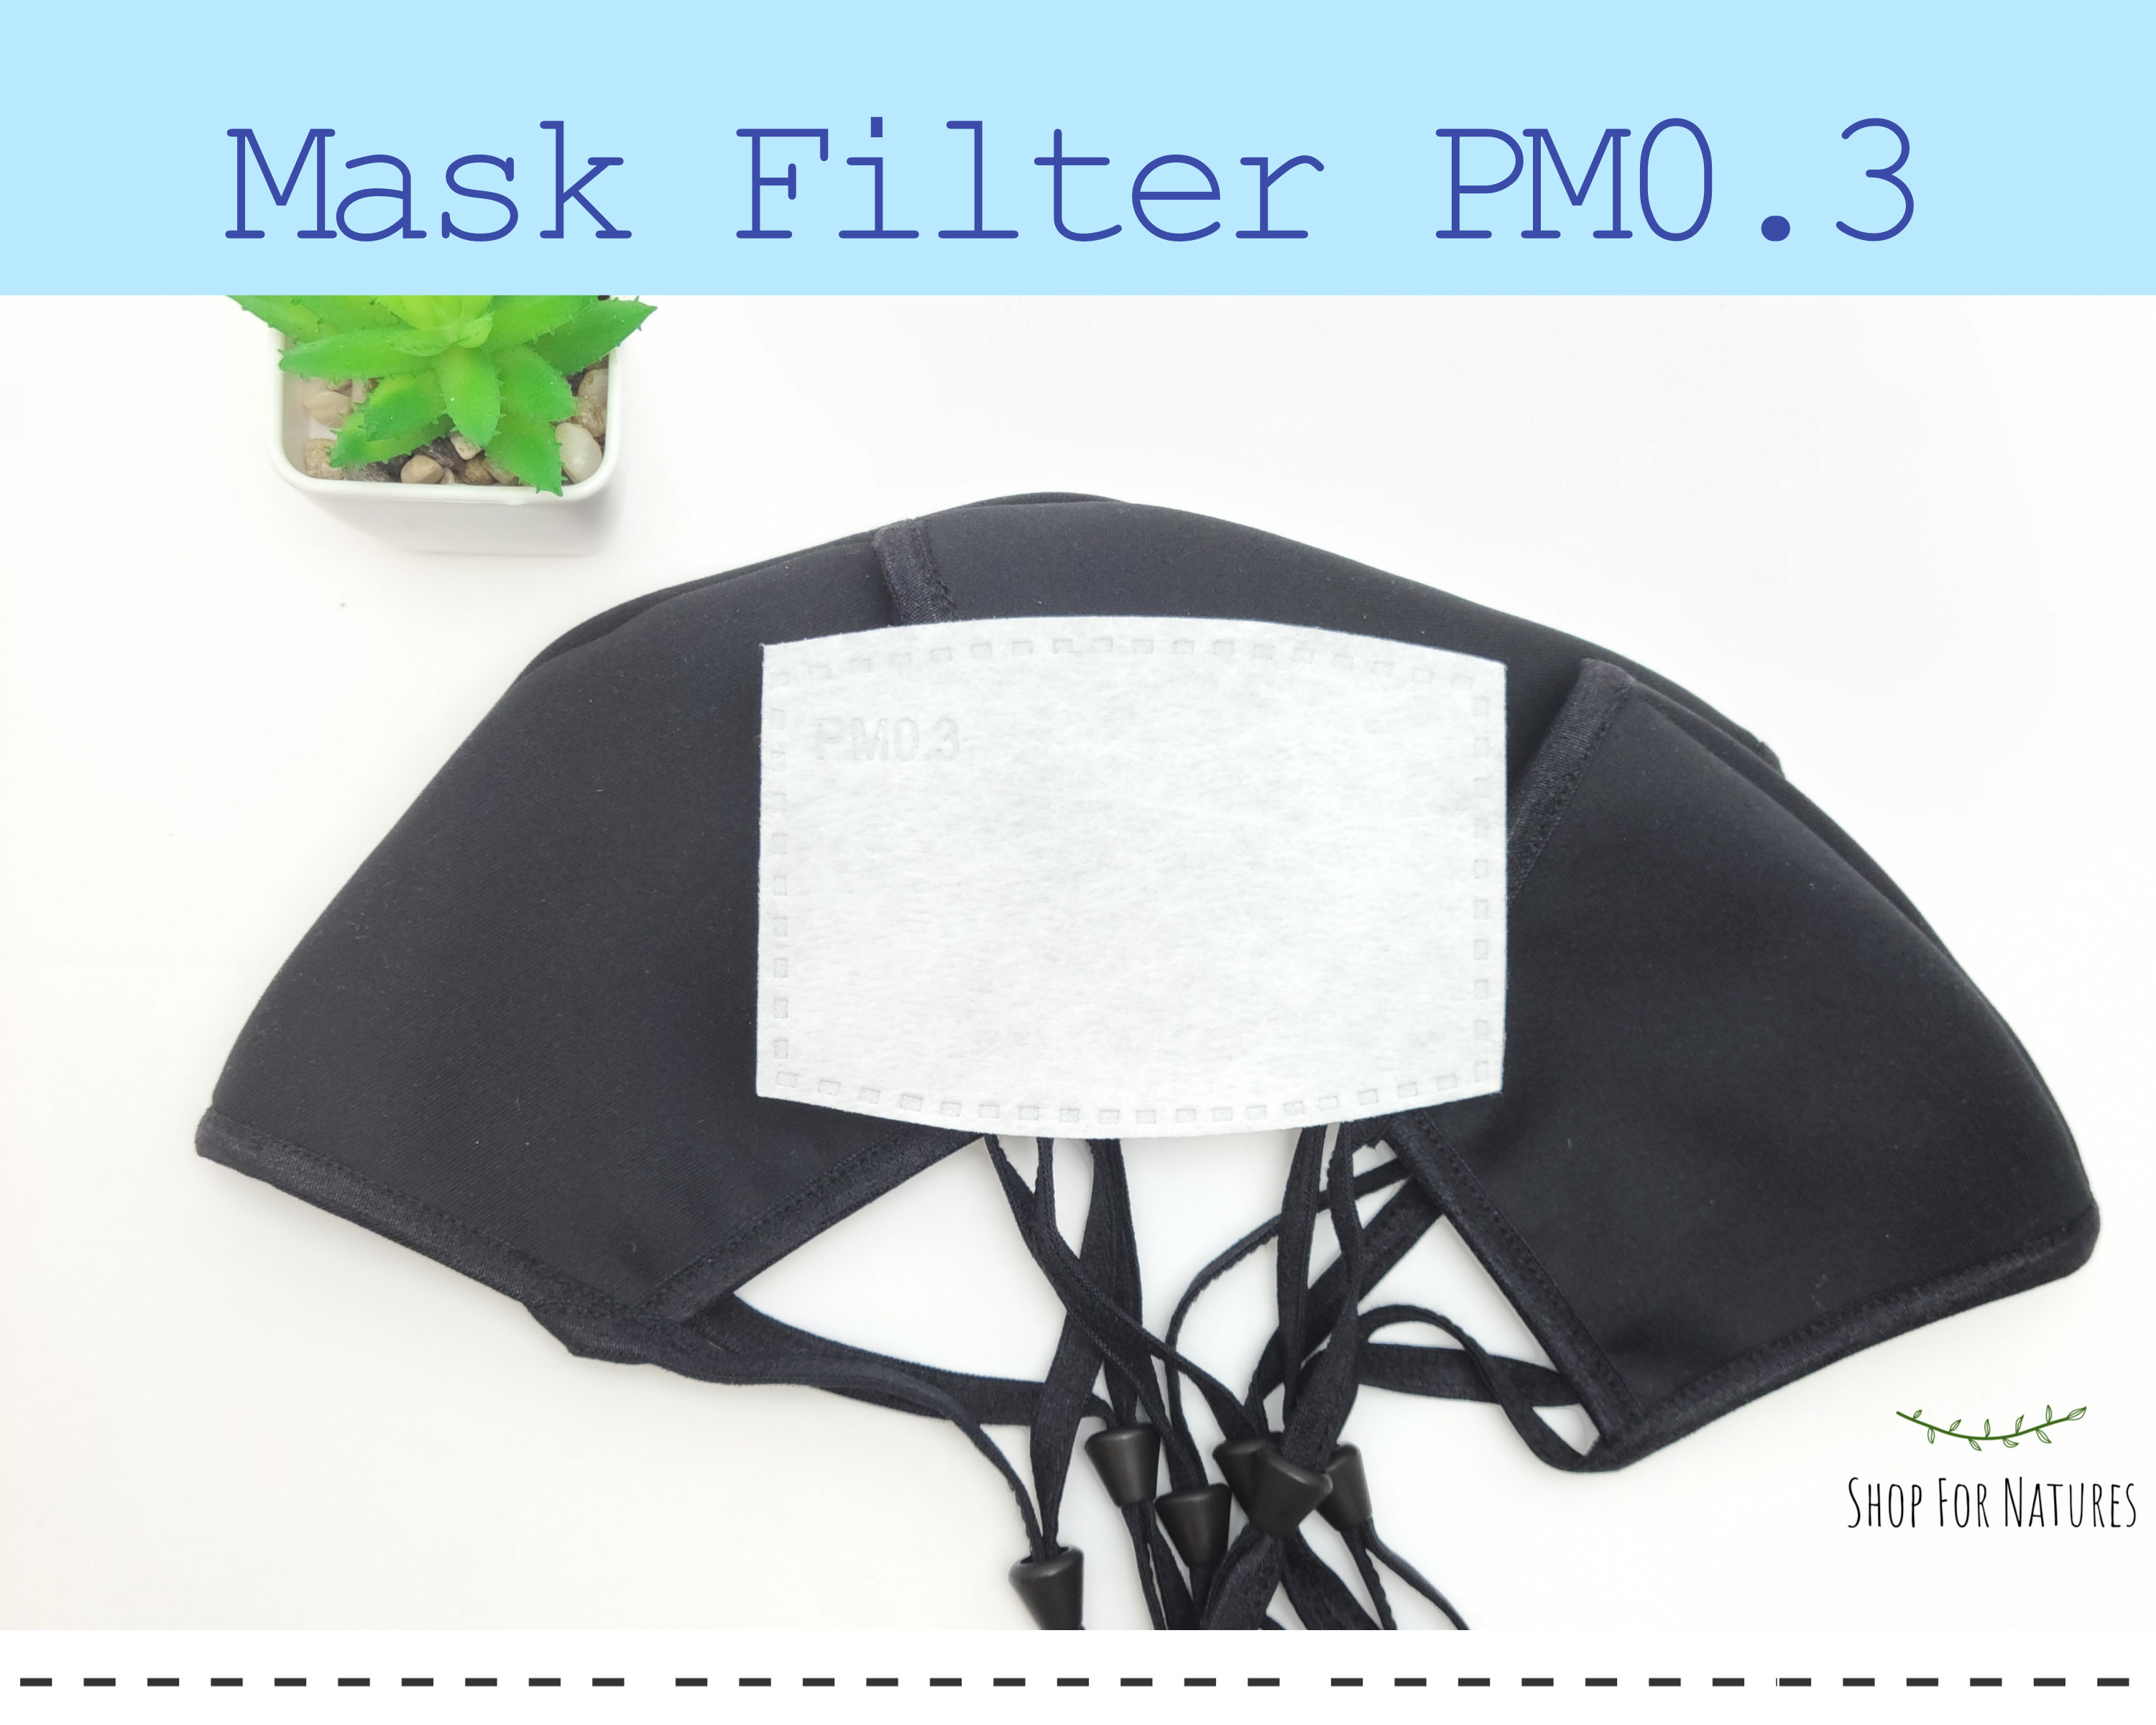 BFE95 Melt Blown Face Mask Filter Material of Polypropylene, Sold by the  Yard BFE 95 HEPA, HEPA Filter, Filter Material, 